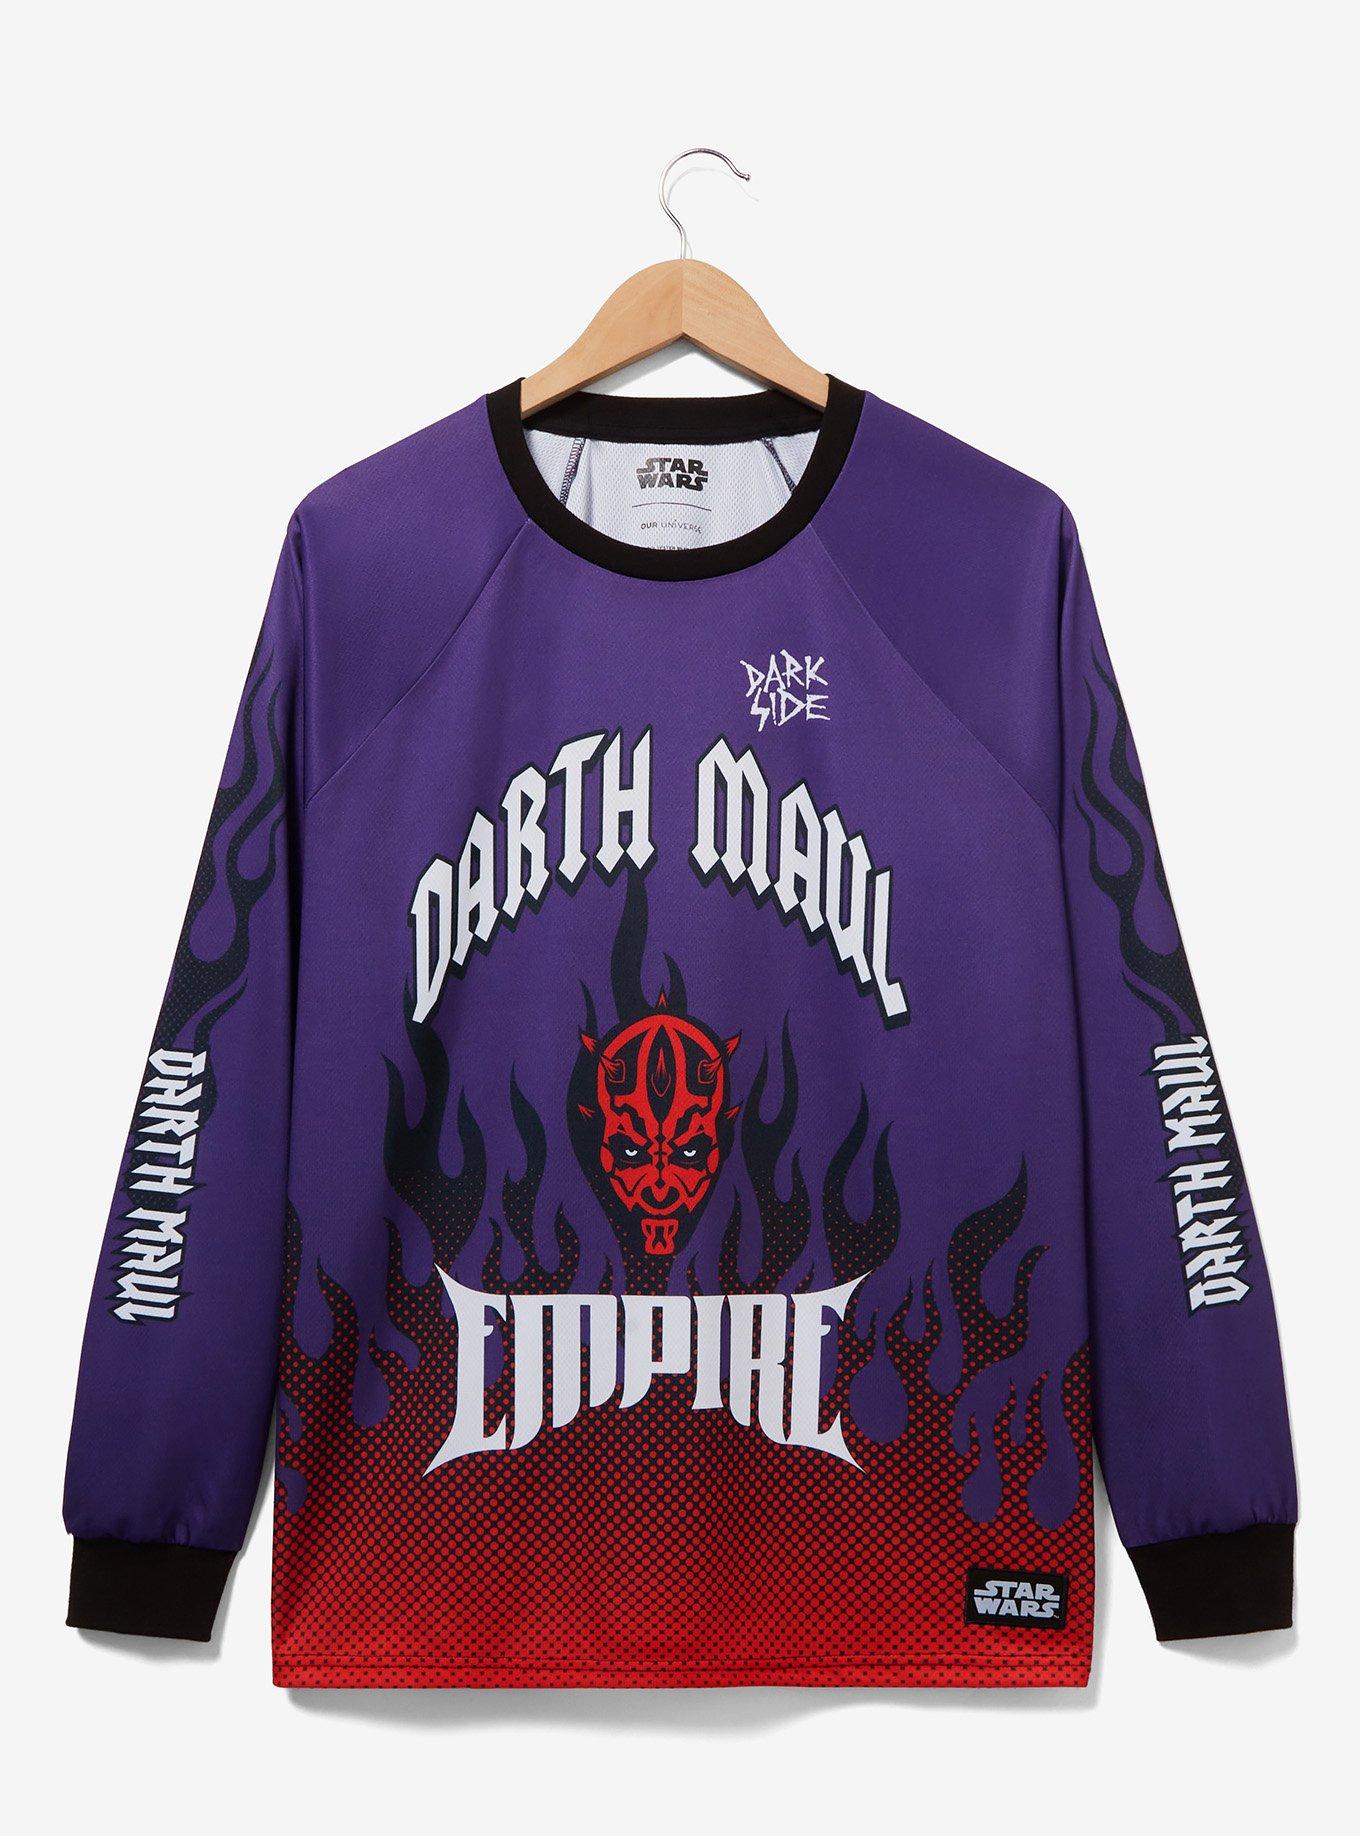 Star Wars Darth Maul Motocross Jersey - BoxLunch Exclusive, PURPLE, hi-res